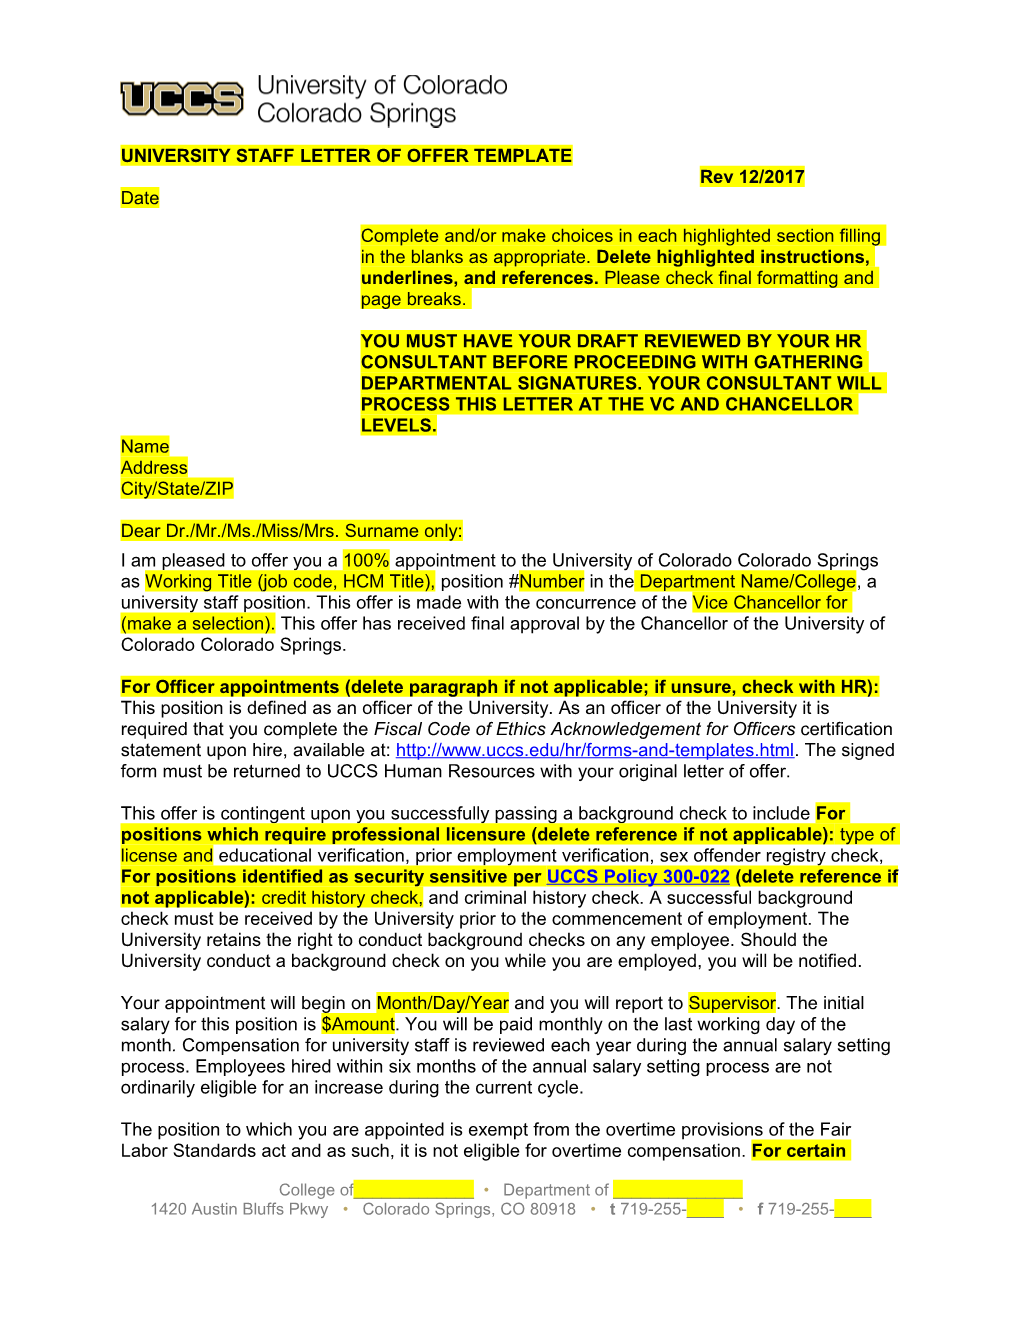 University Staff Letter of Offer Template